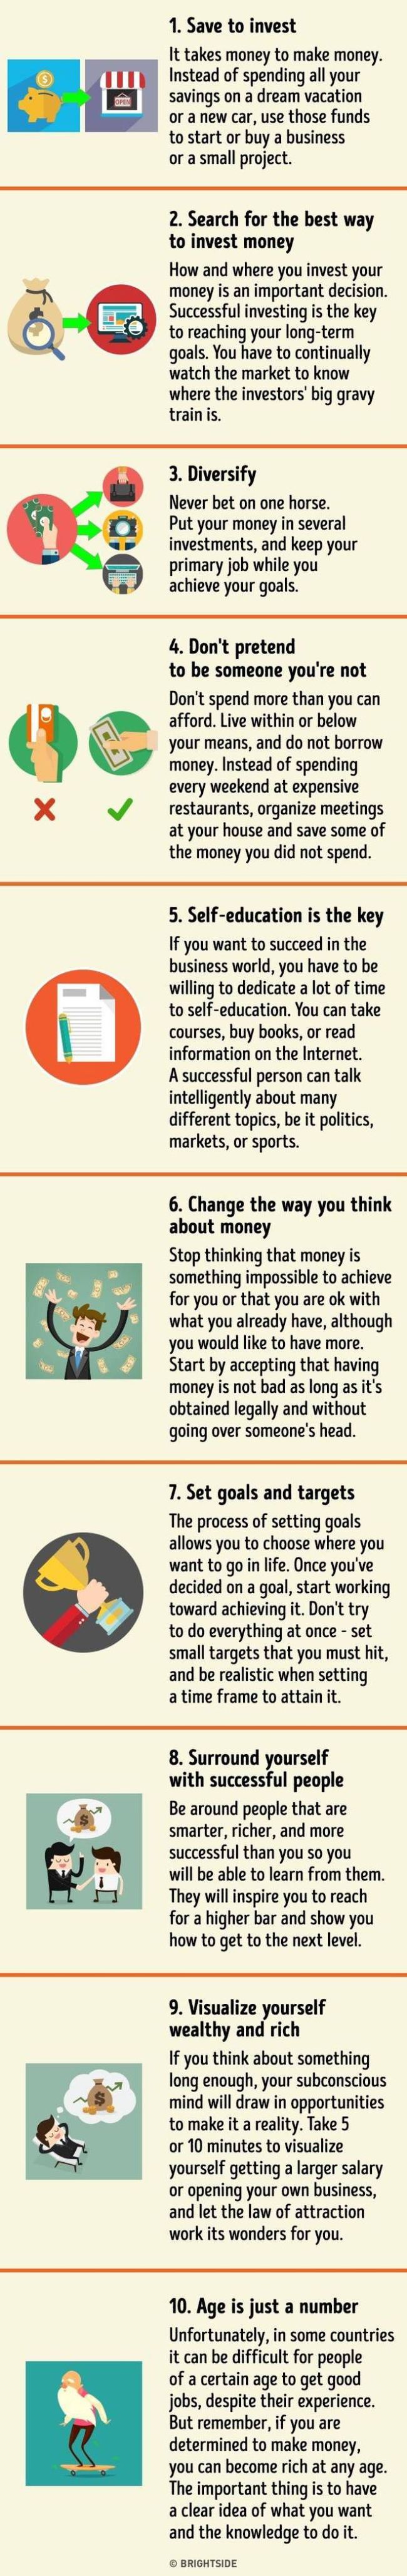 10 Easy Tips To Help You Become Rich And Successful (infographic)